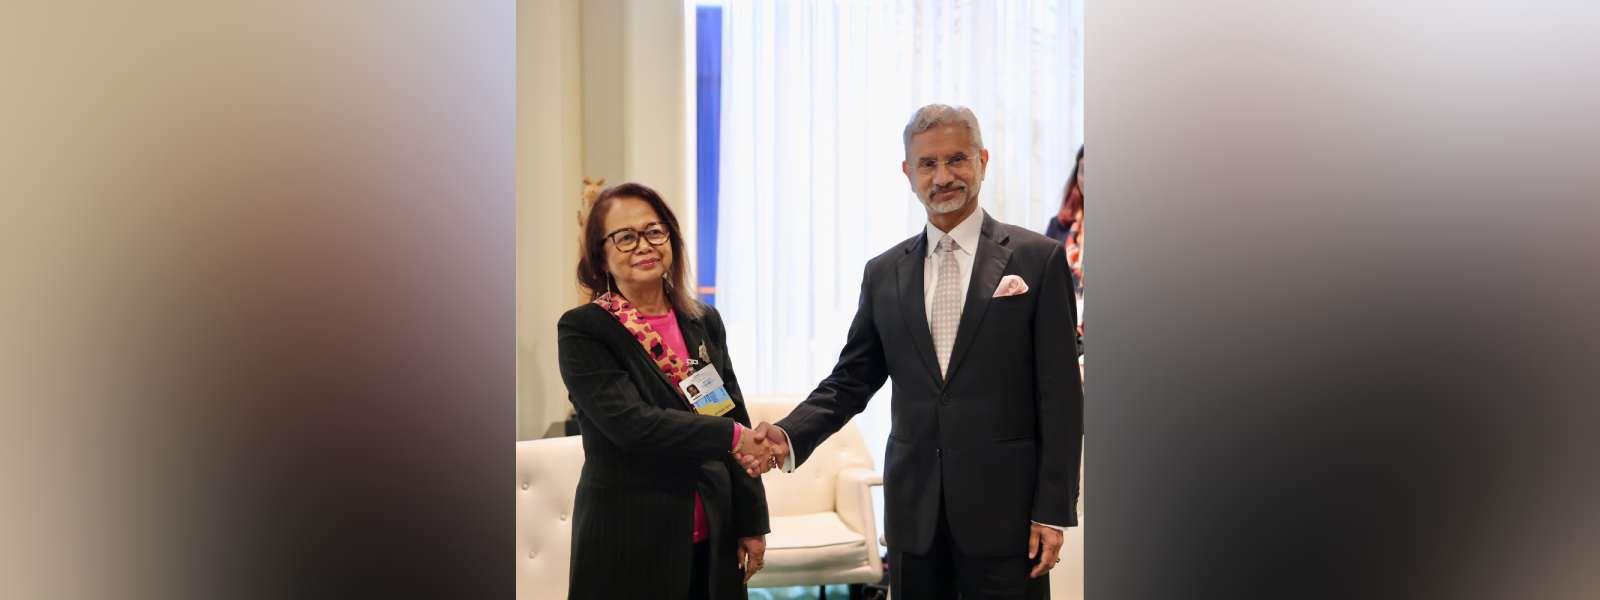 External Affairs Minister Dr. S. Jaishankar met H.E. Ms. Yvette Sylla, Foreign Minister of Madagascar on the sidelines of 78th Session of the UNGA in New York